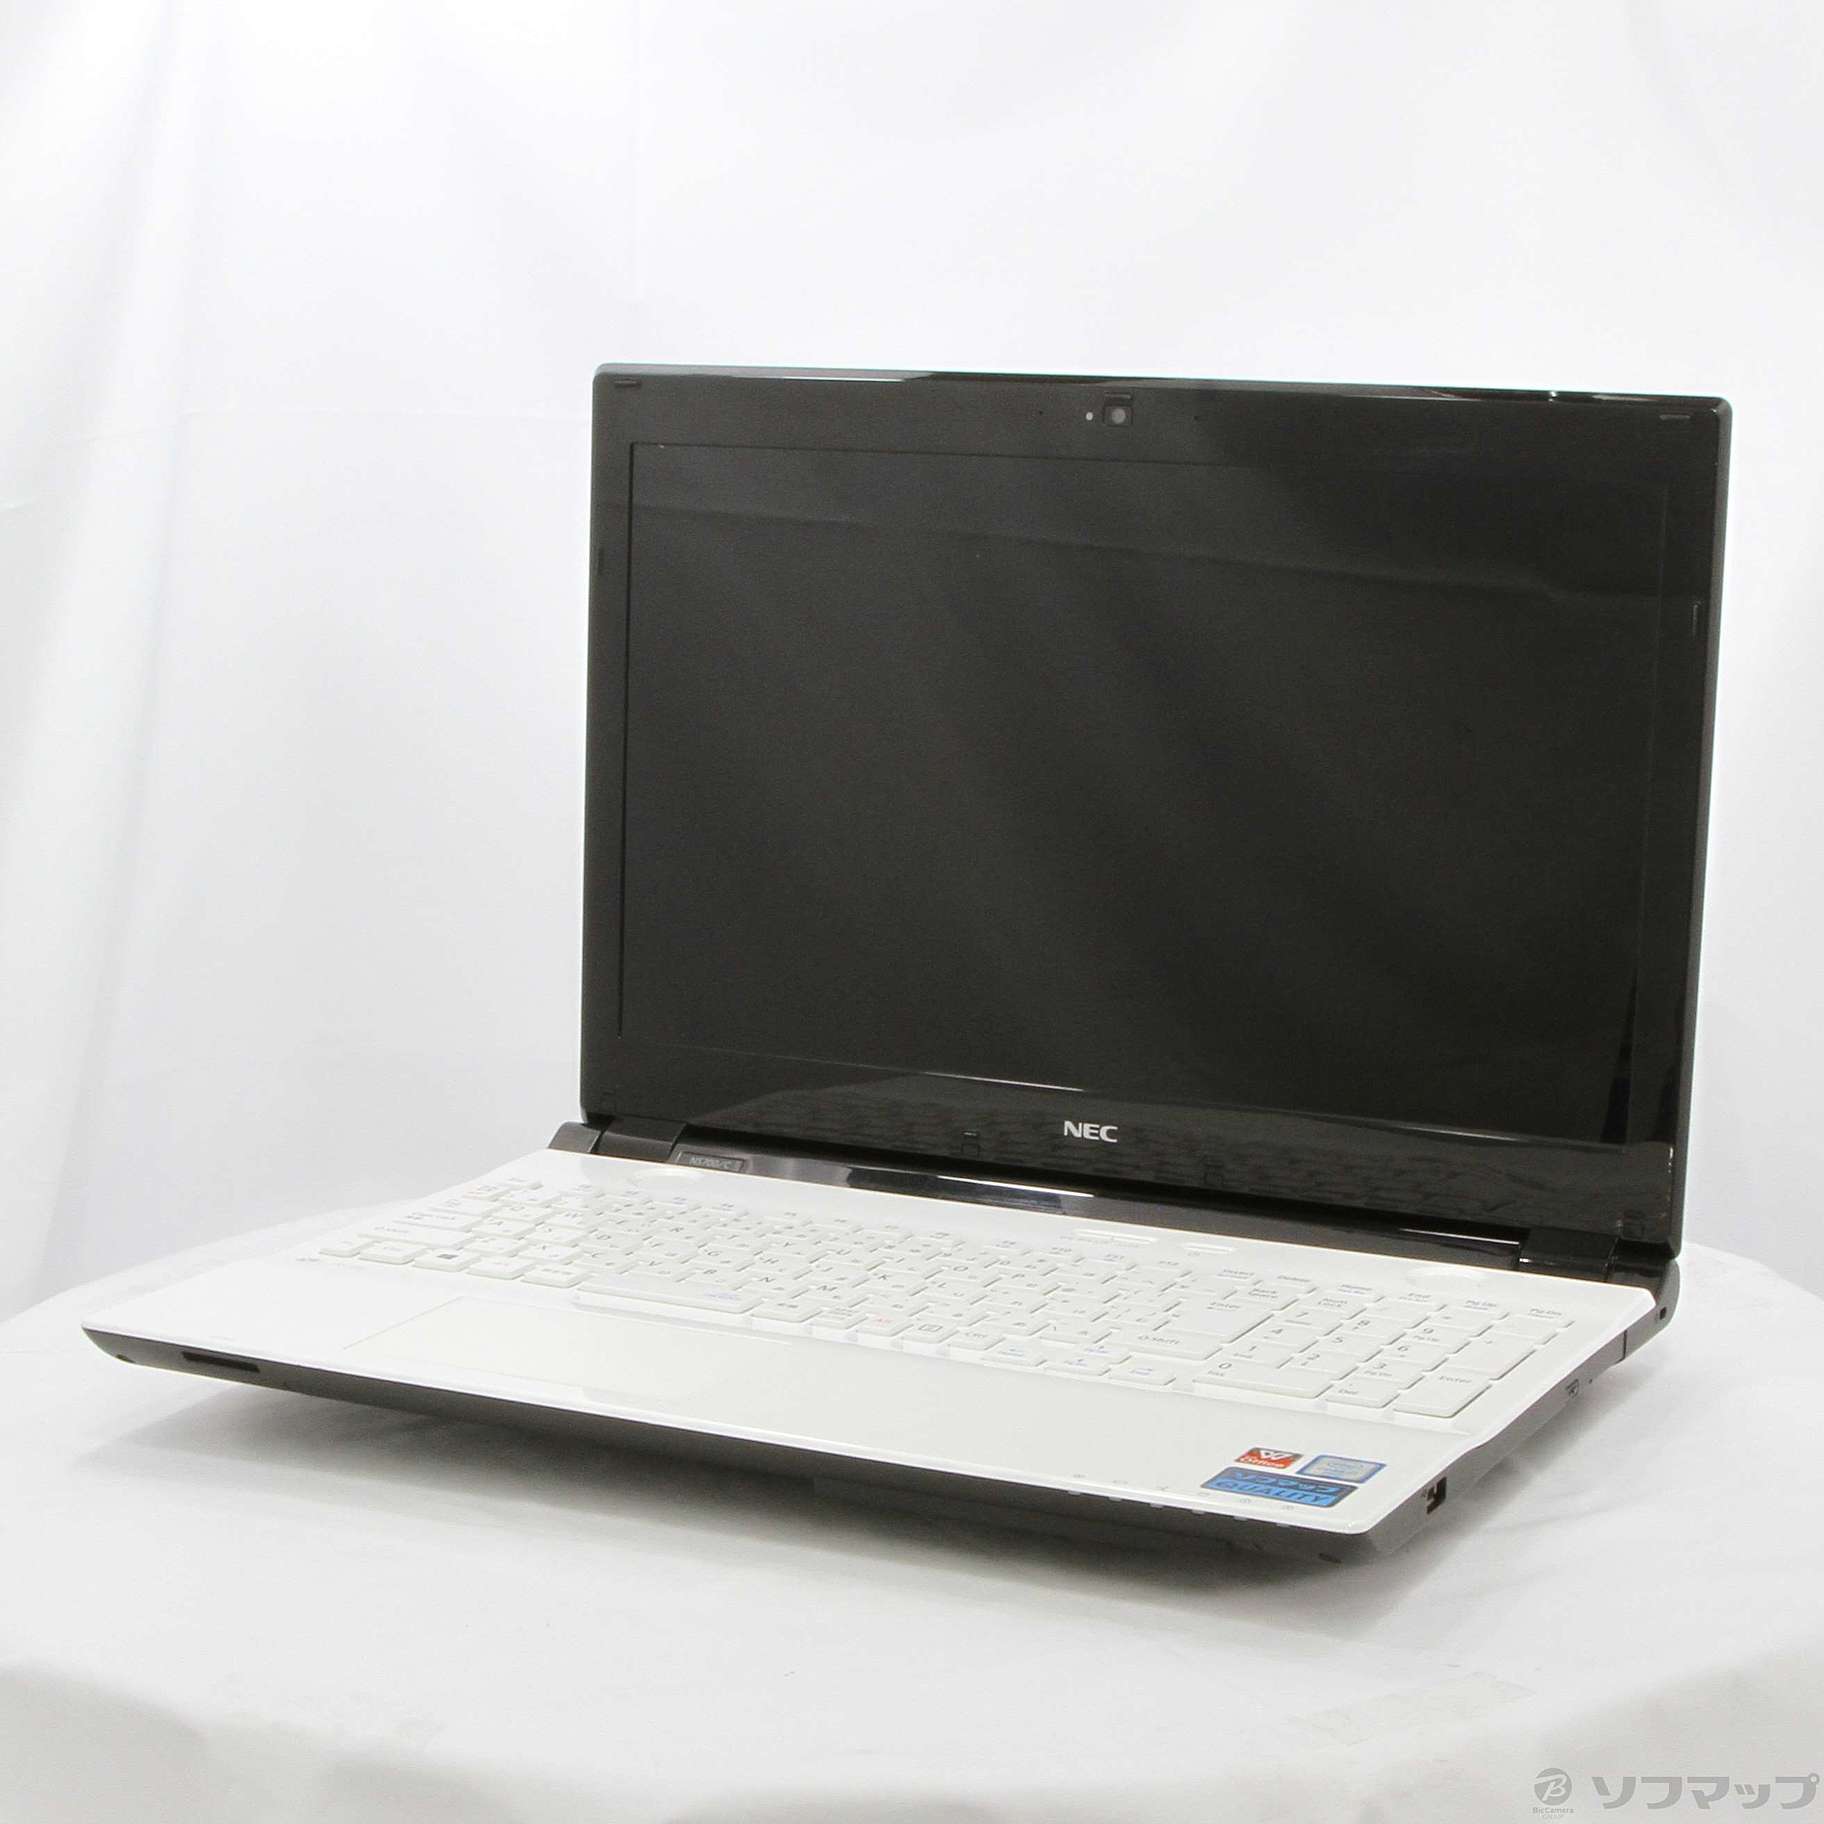 NEC LaVie Note Standard PC-NS700CAW - library.iainponorogo.ac.id